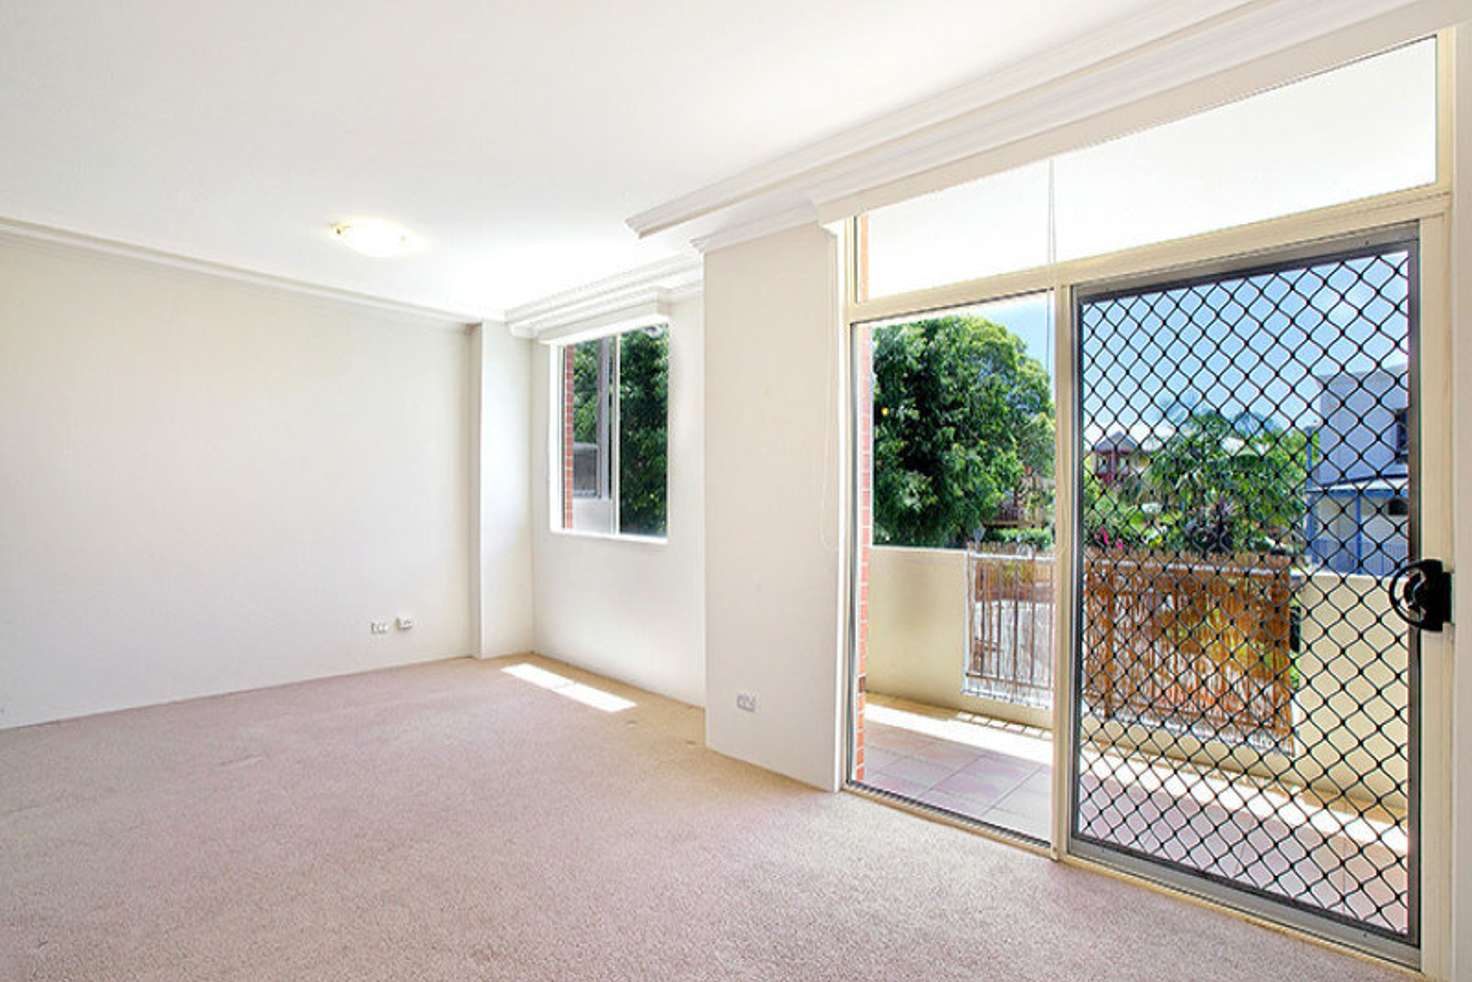 Main view of Homely apartment listing, 114/85 Reynolds Street, Balmain NSW 2041